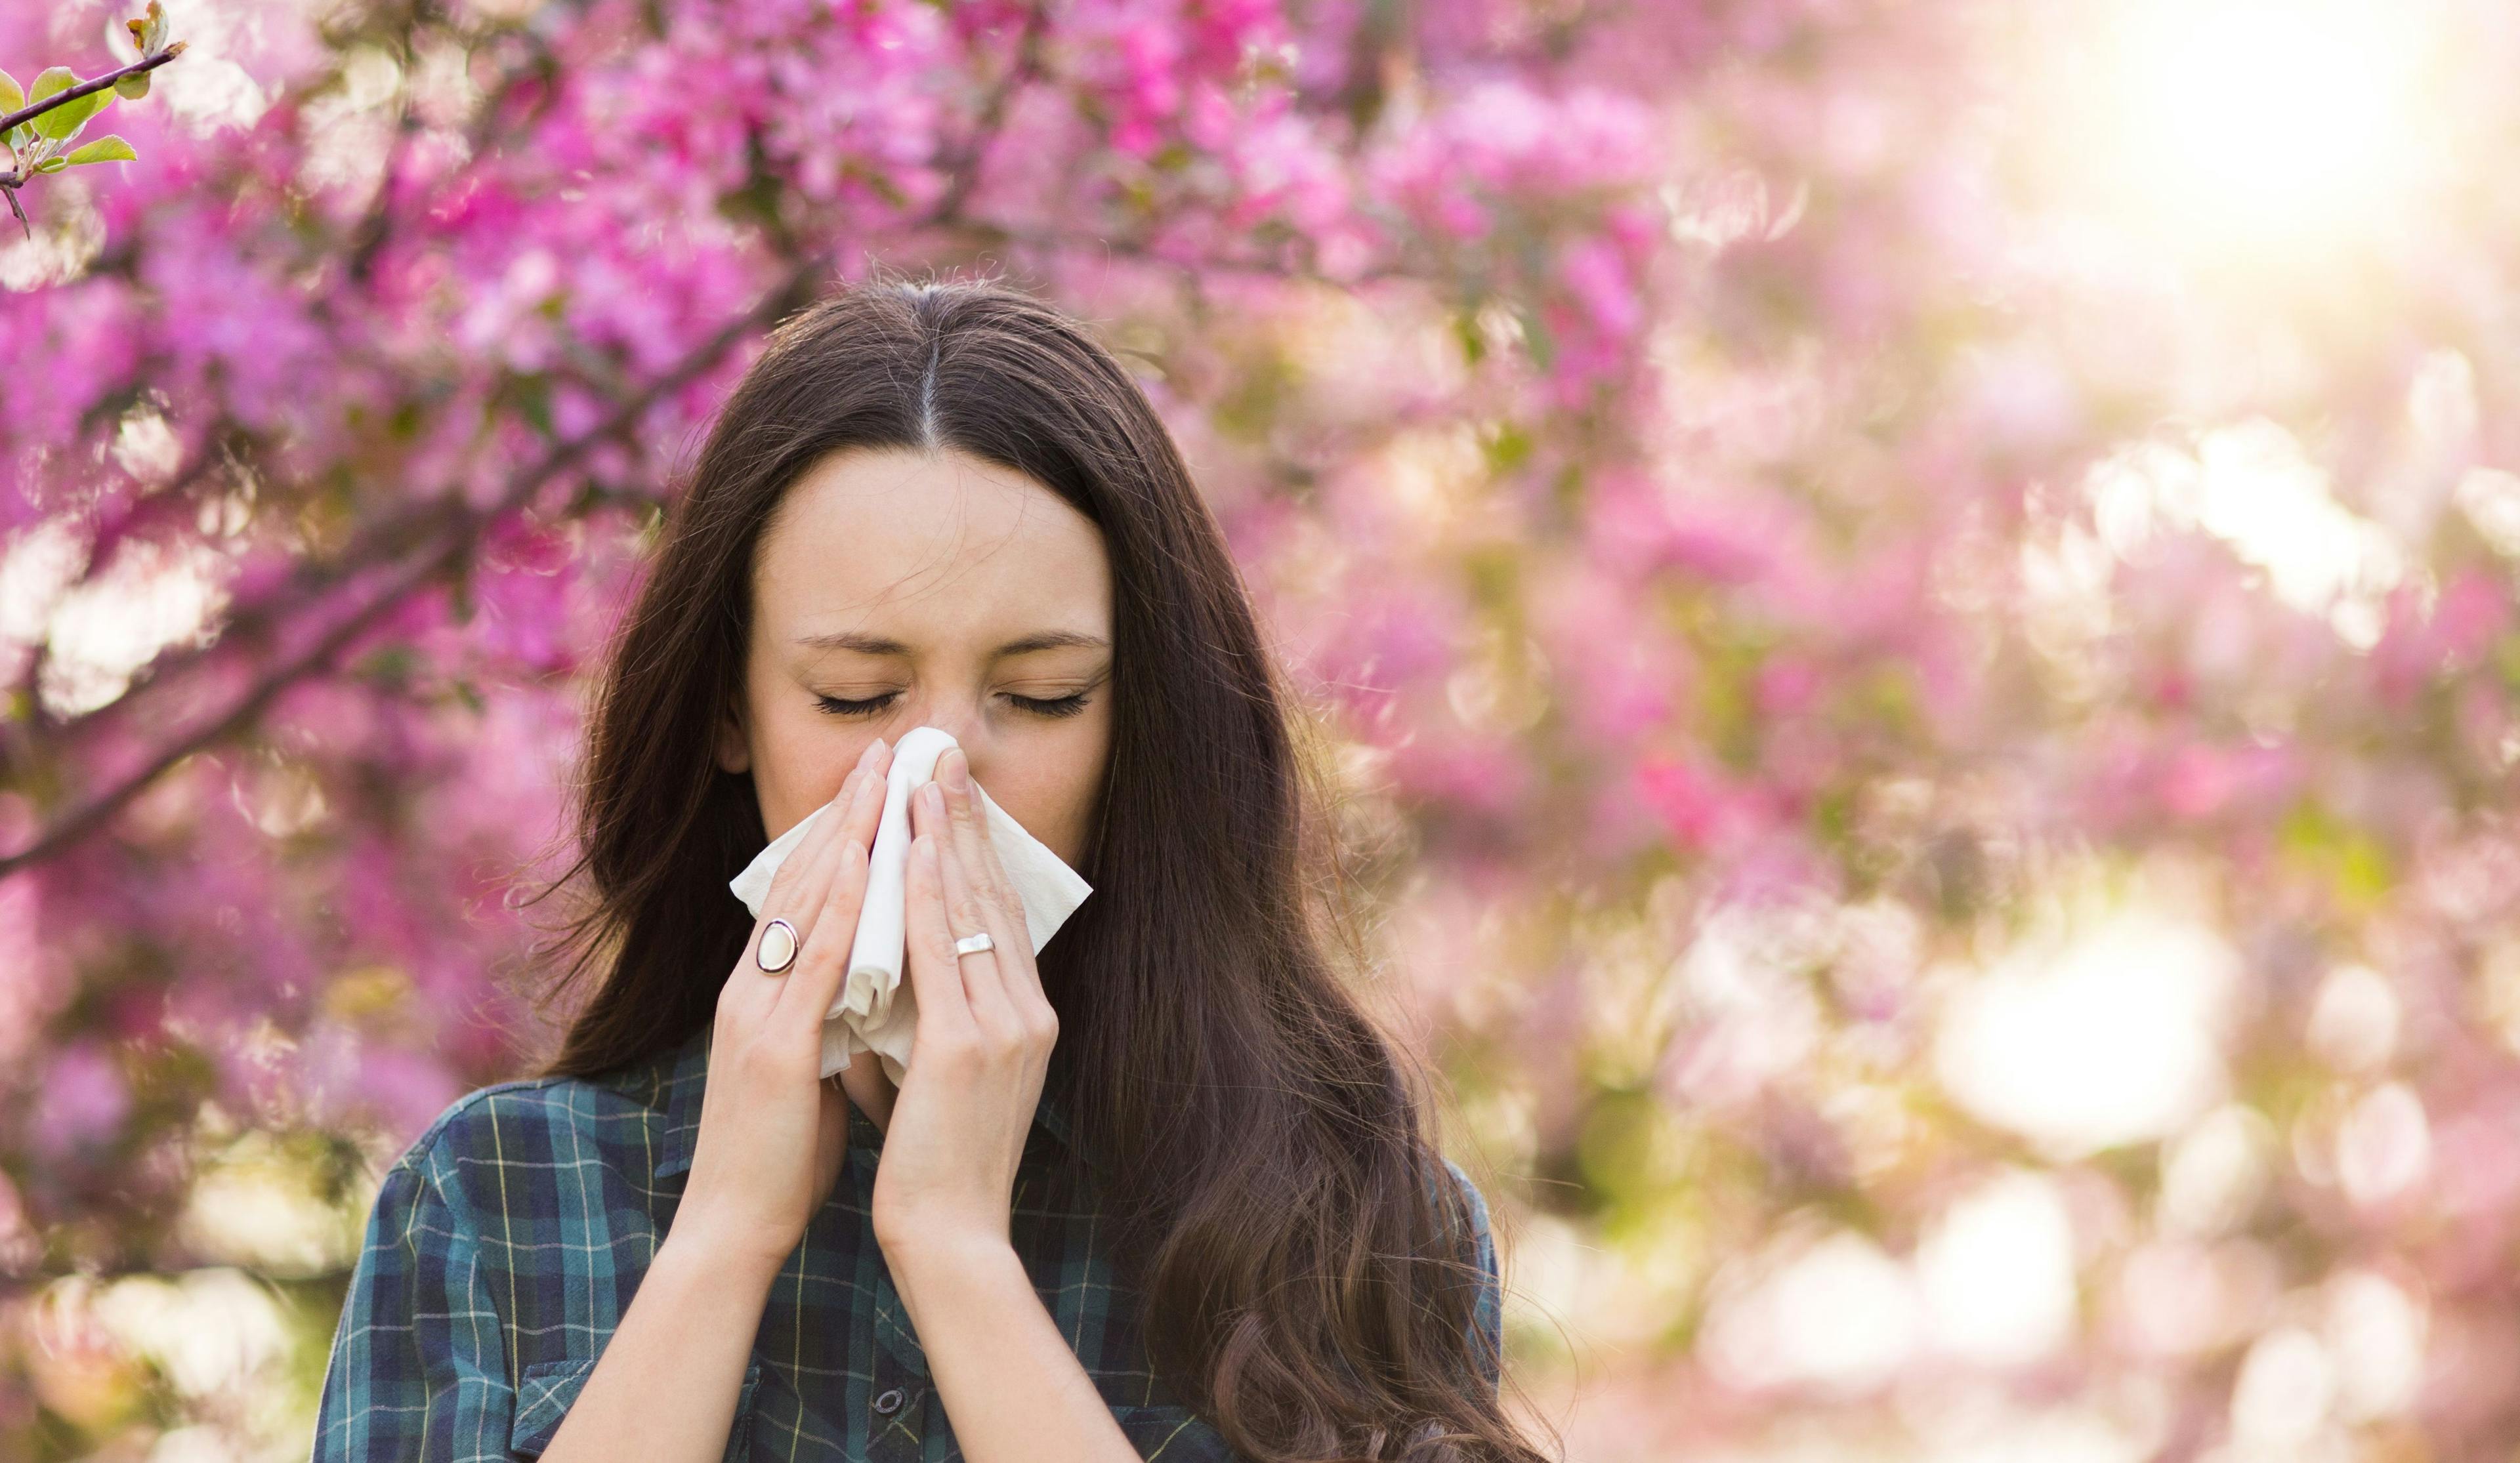 Woman blowing nose because of spring pollen allergy | Image Credit: Budimir Jevtic - stock.adobe.com